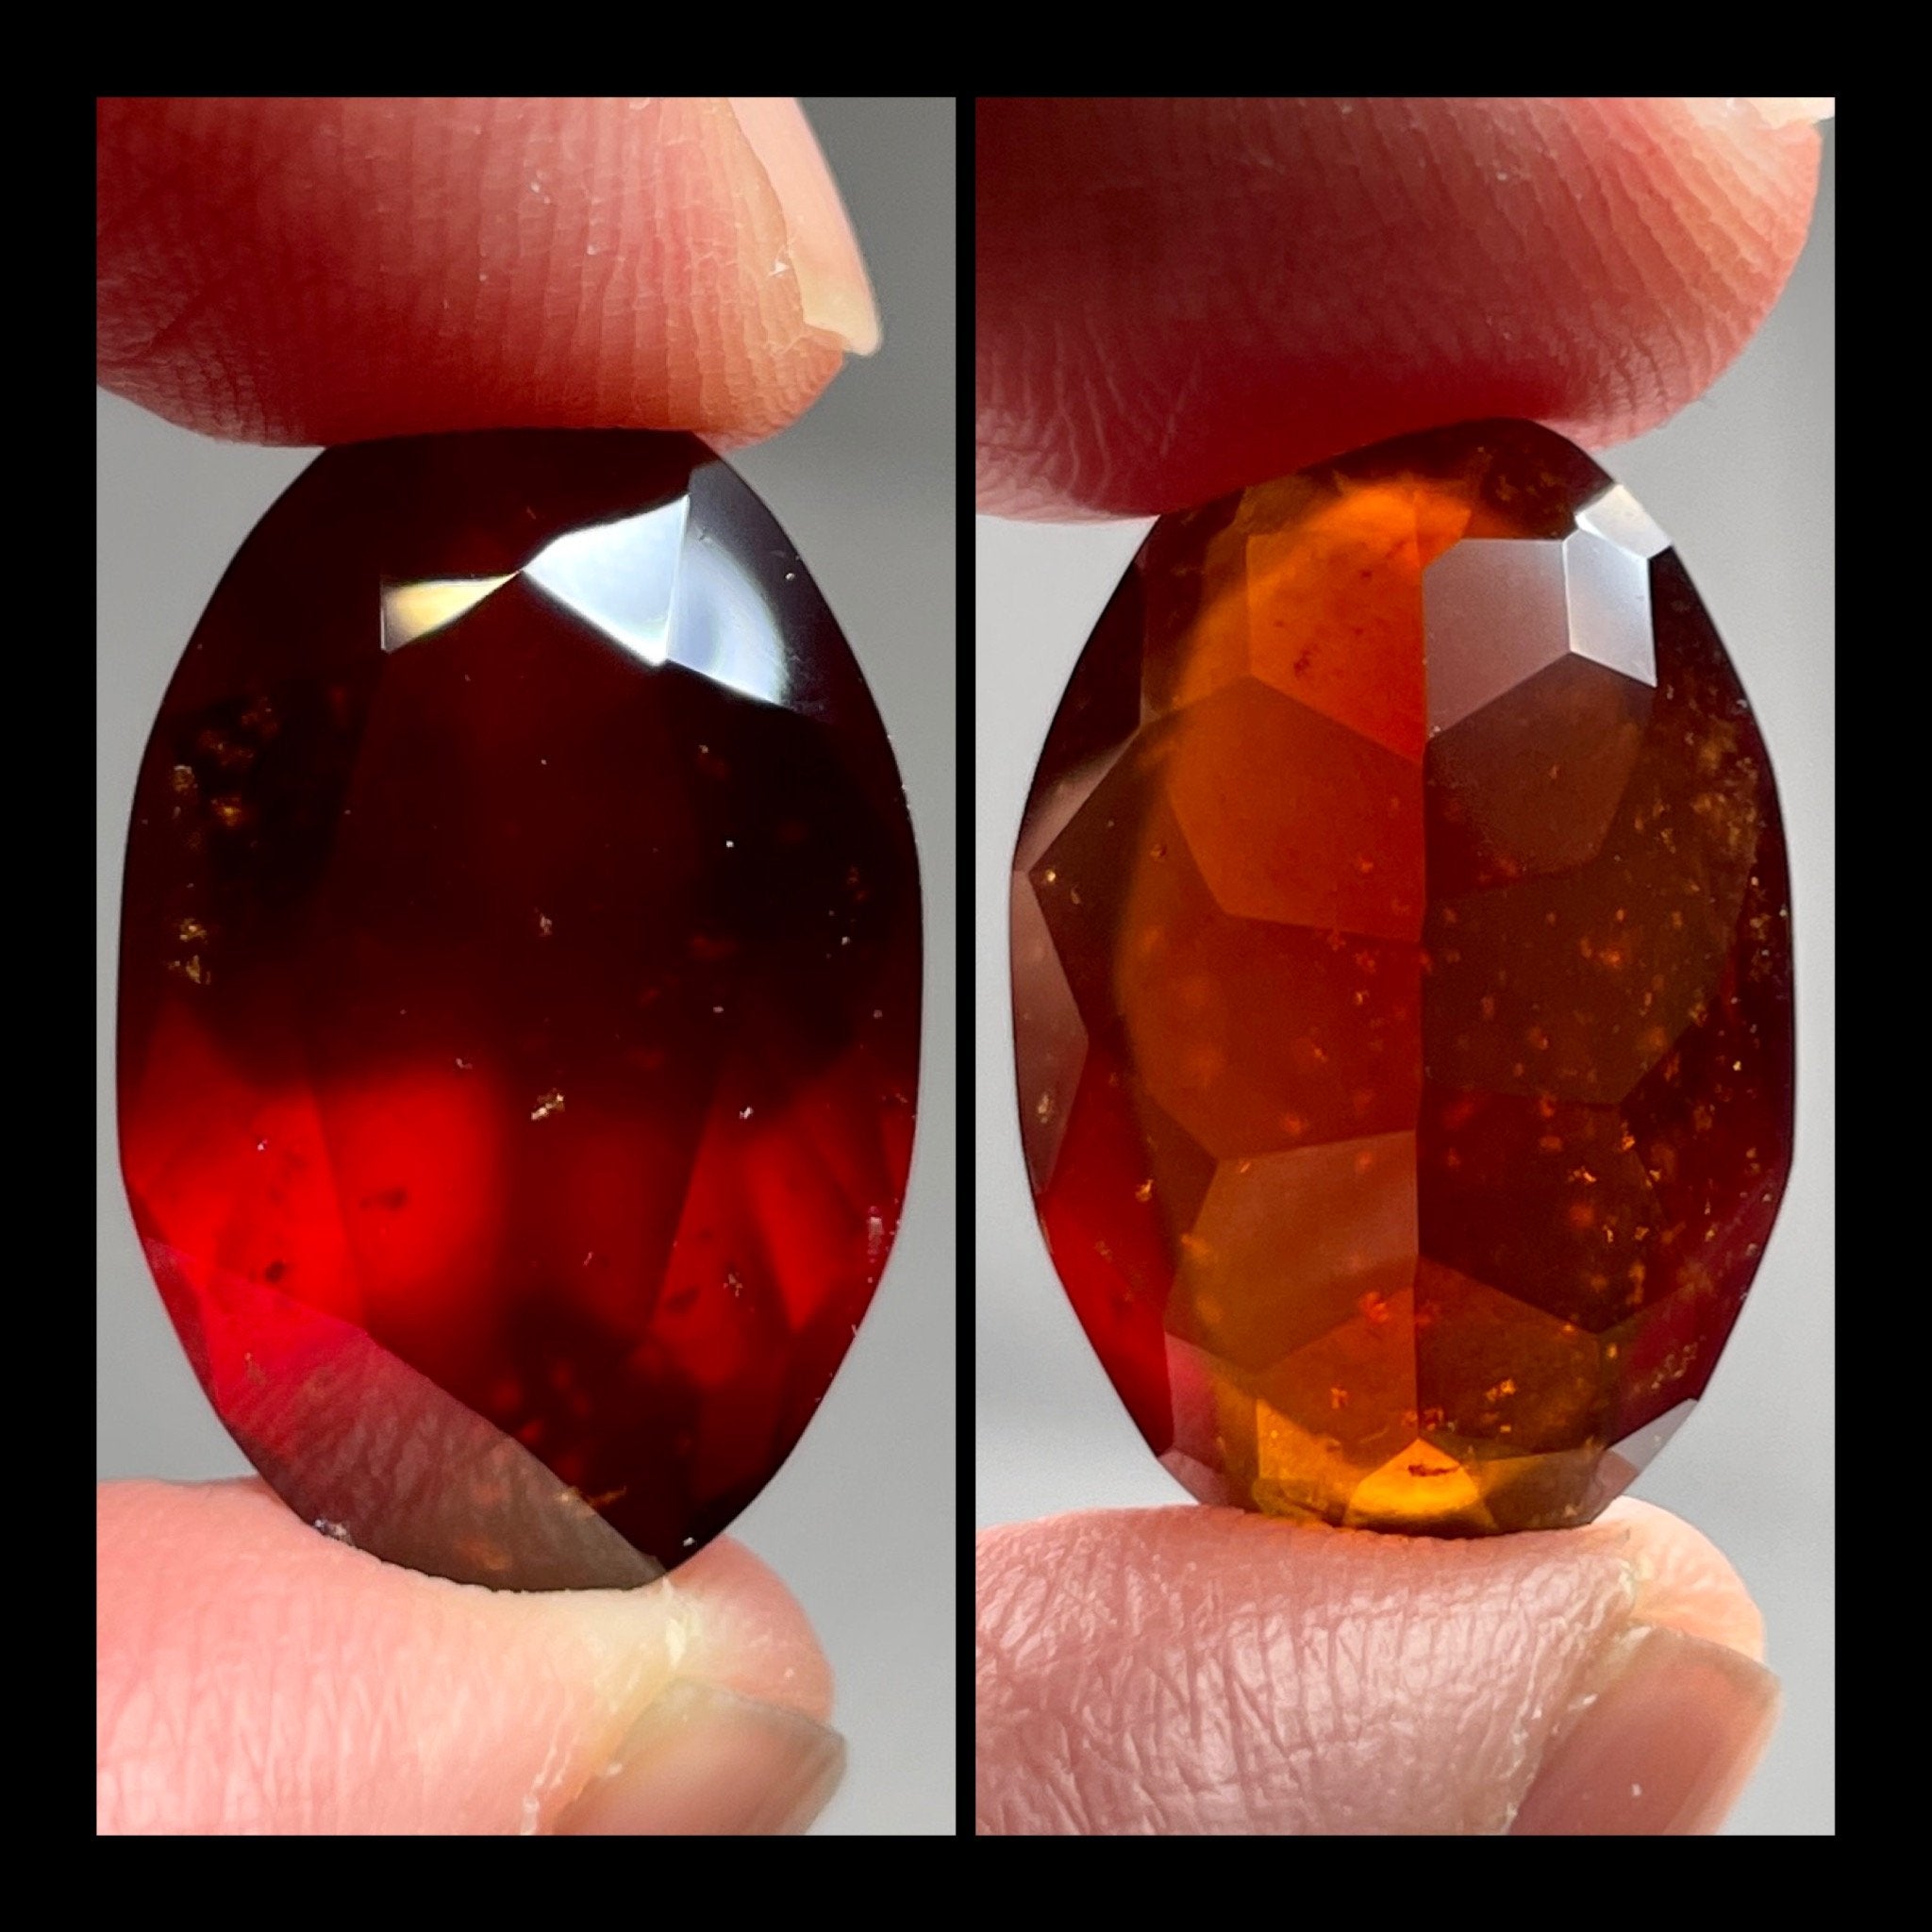 20.13Ct Hessonite Garnet Tanzania Untreated Unheated. 21.2 X 13.5 8 Mm. Use Either Side.